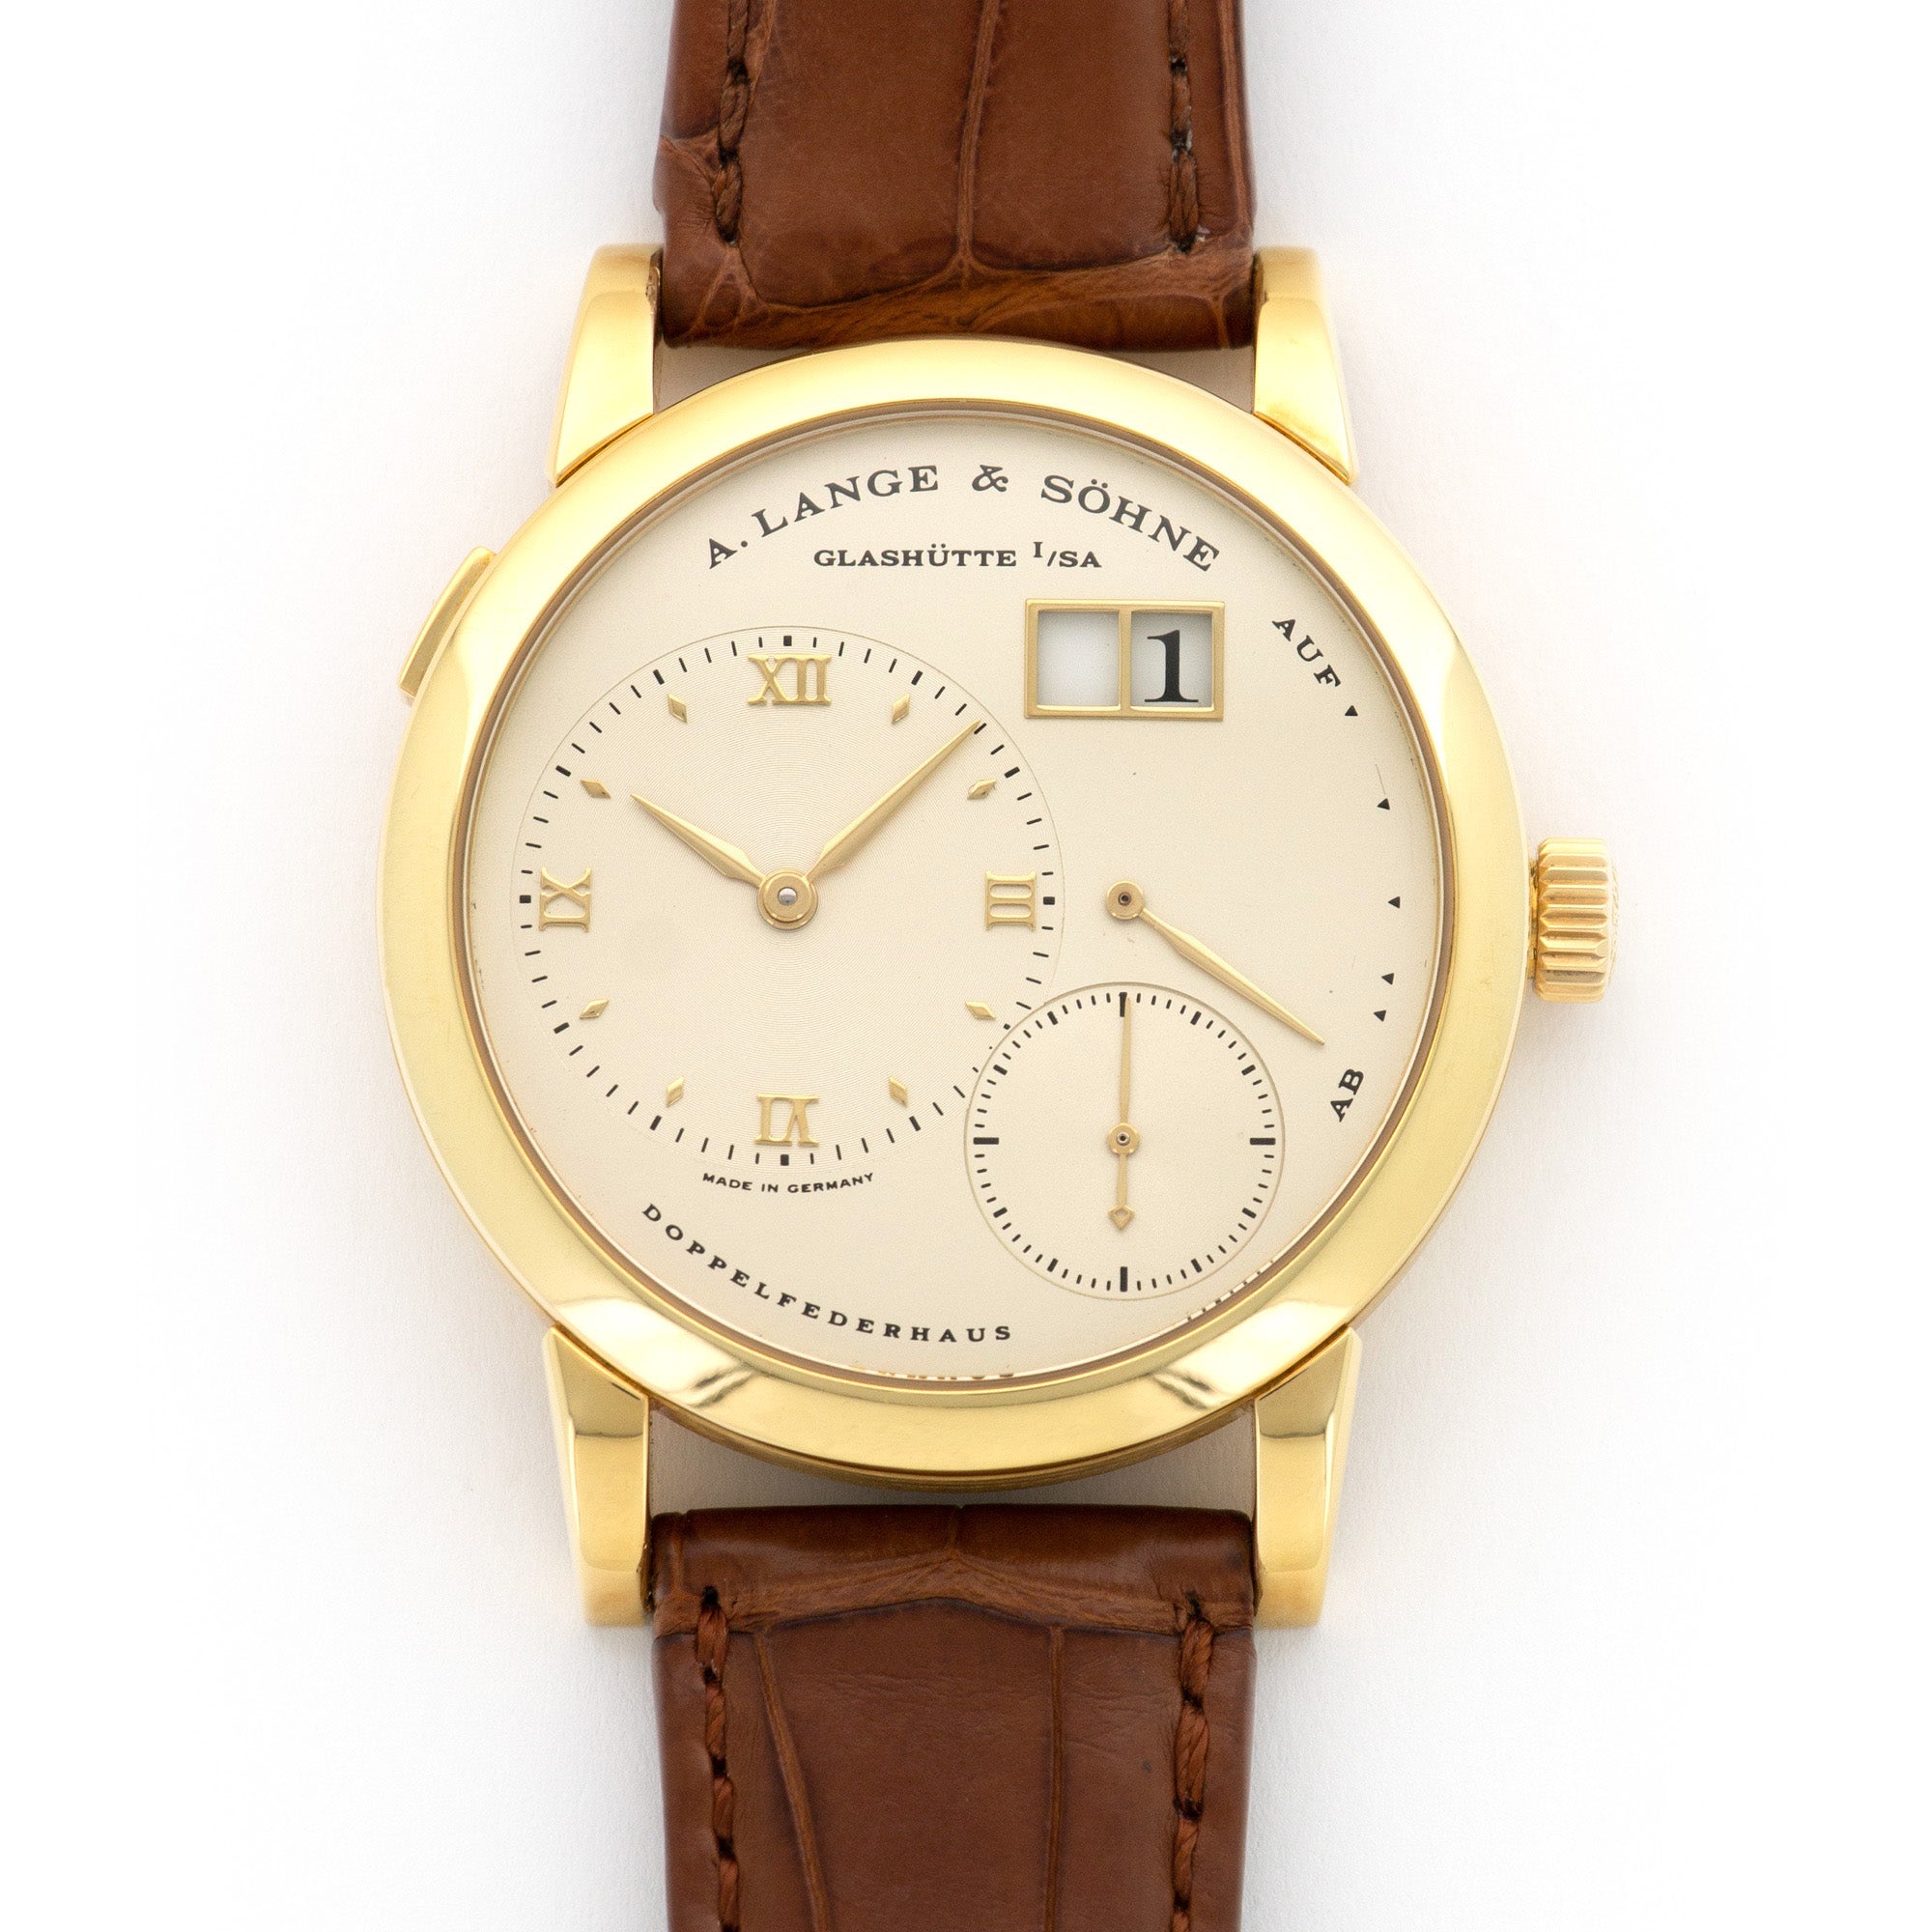 A. Lange & Sohne - A. Lange & Sohne Yellow Gold Lange One First Series Watch, Ref. 101.001 - The Keystone Watches